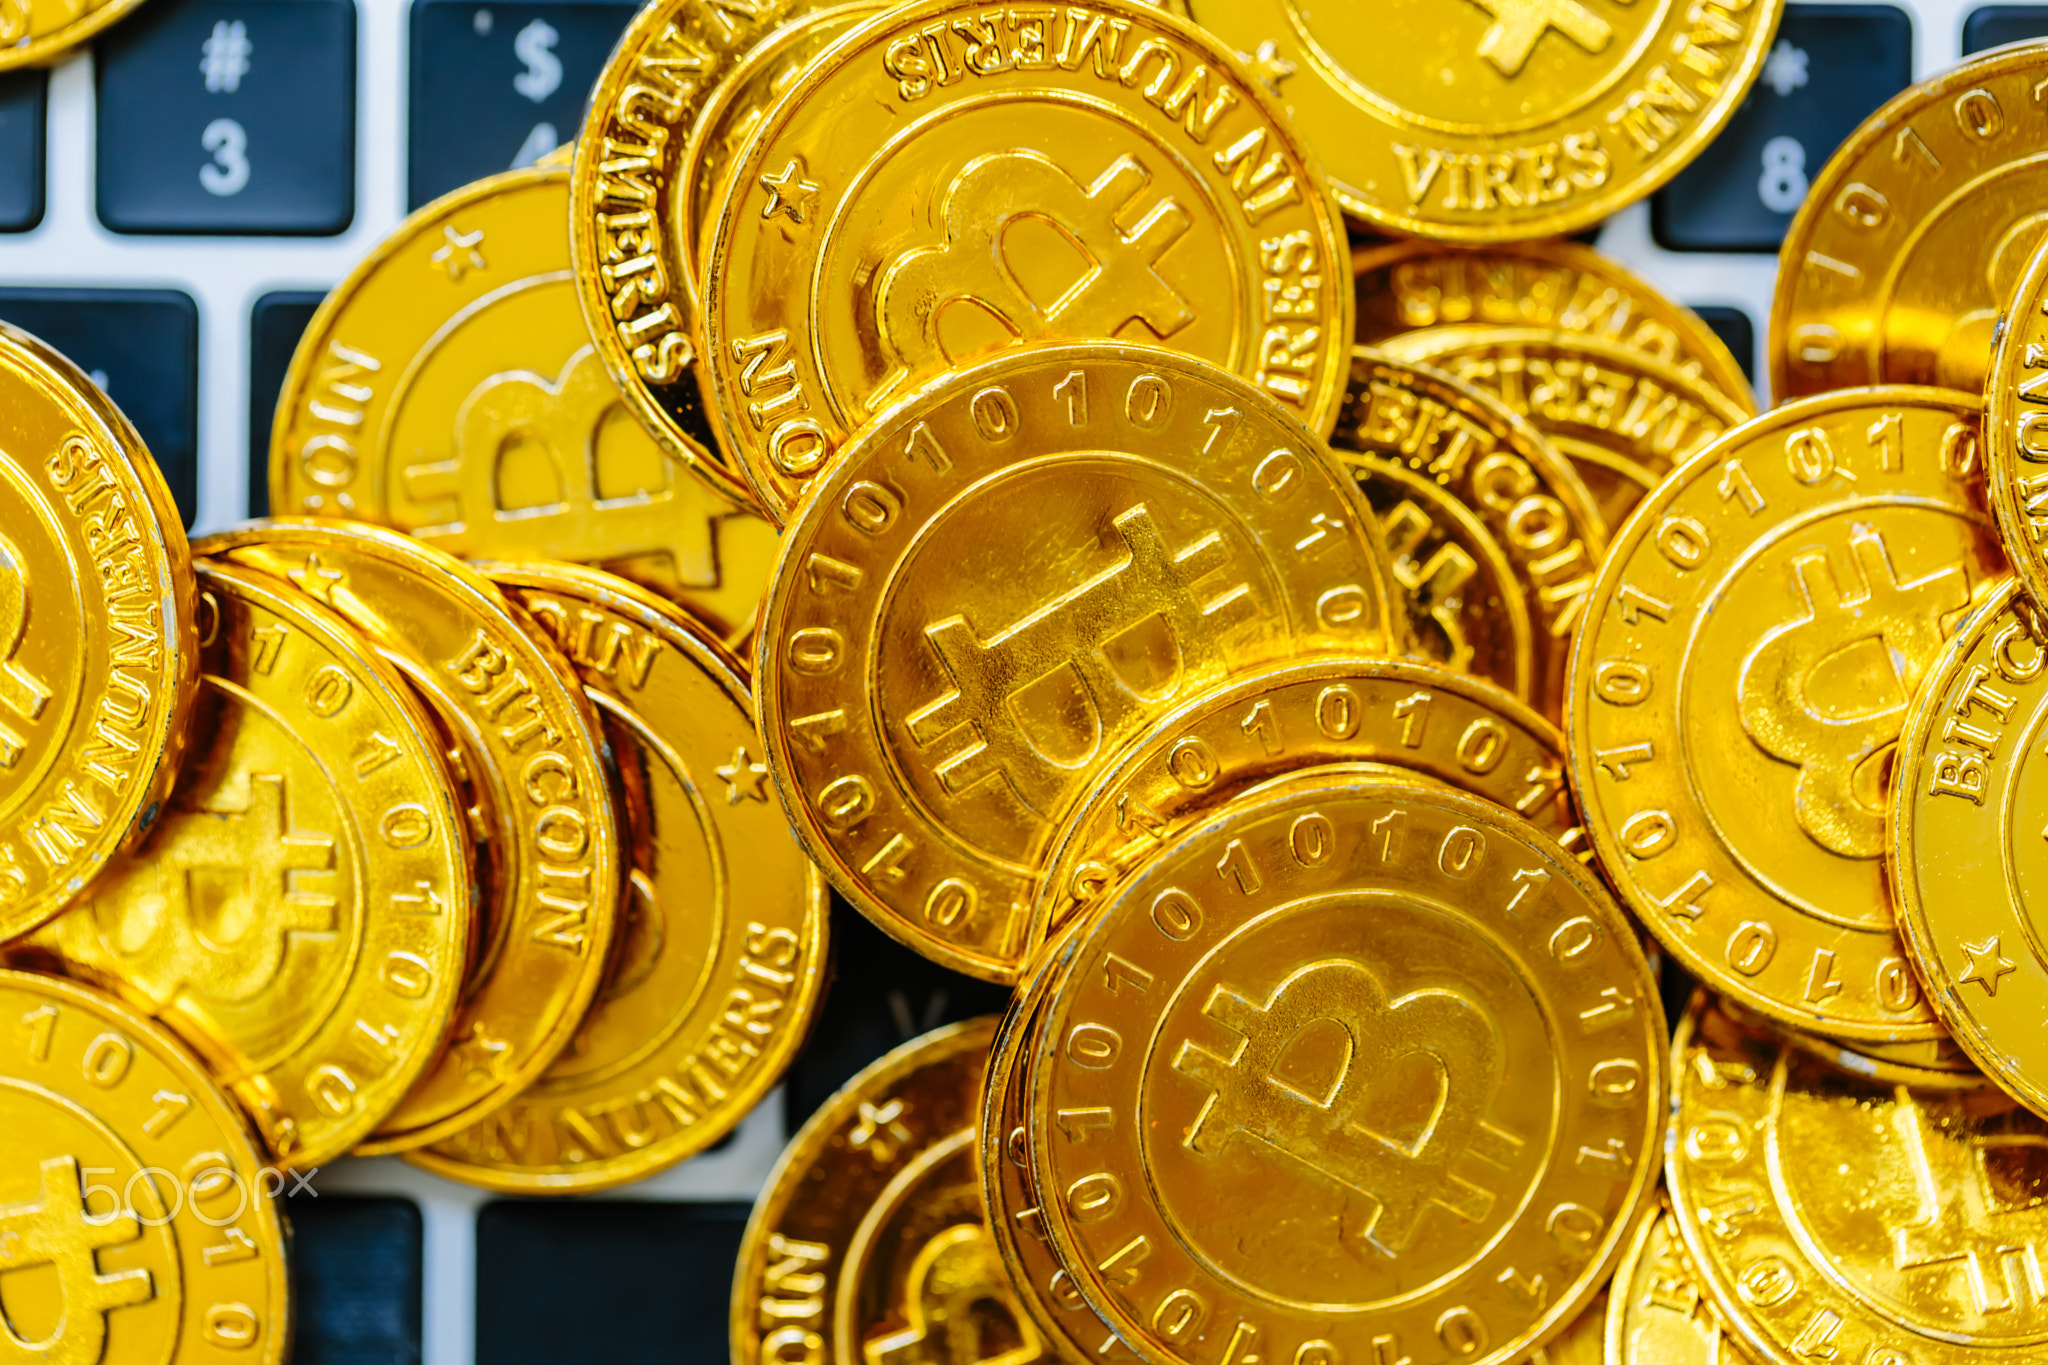 Pile of gold bitcoins on top of a laptop